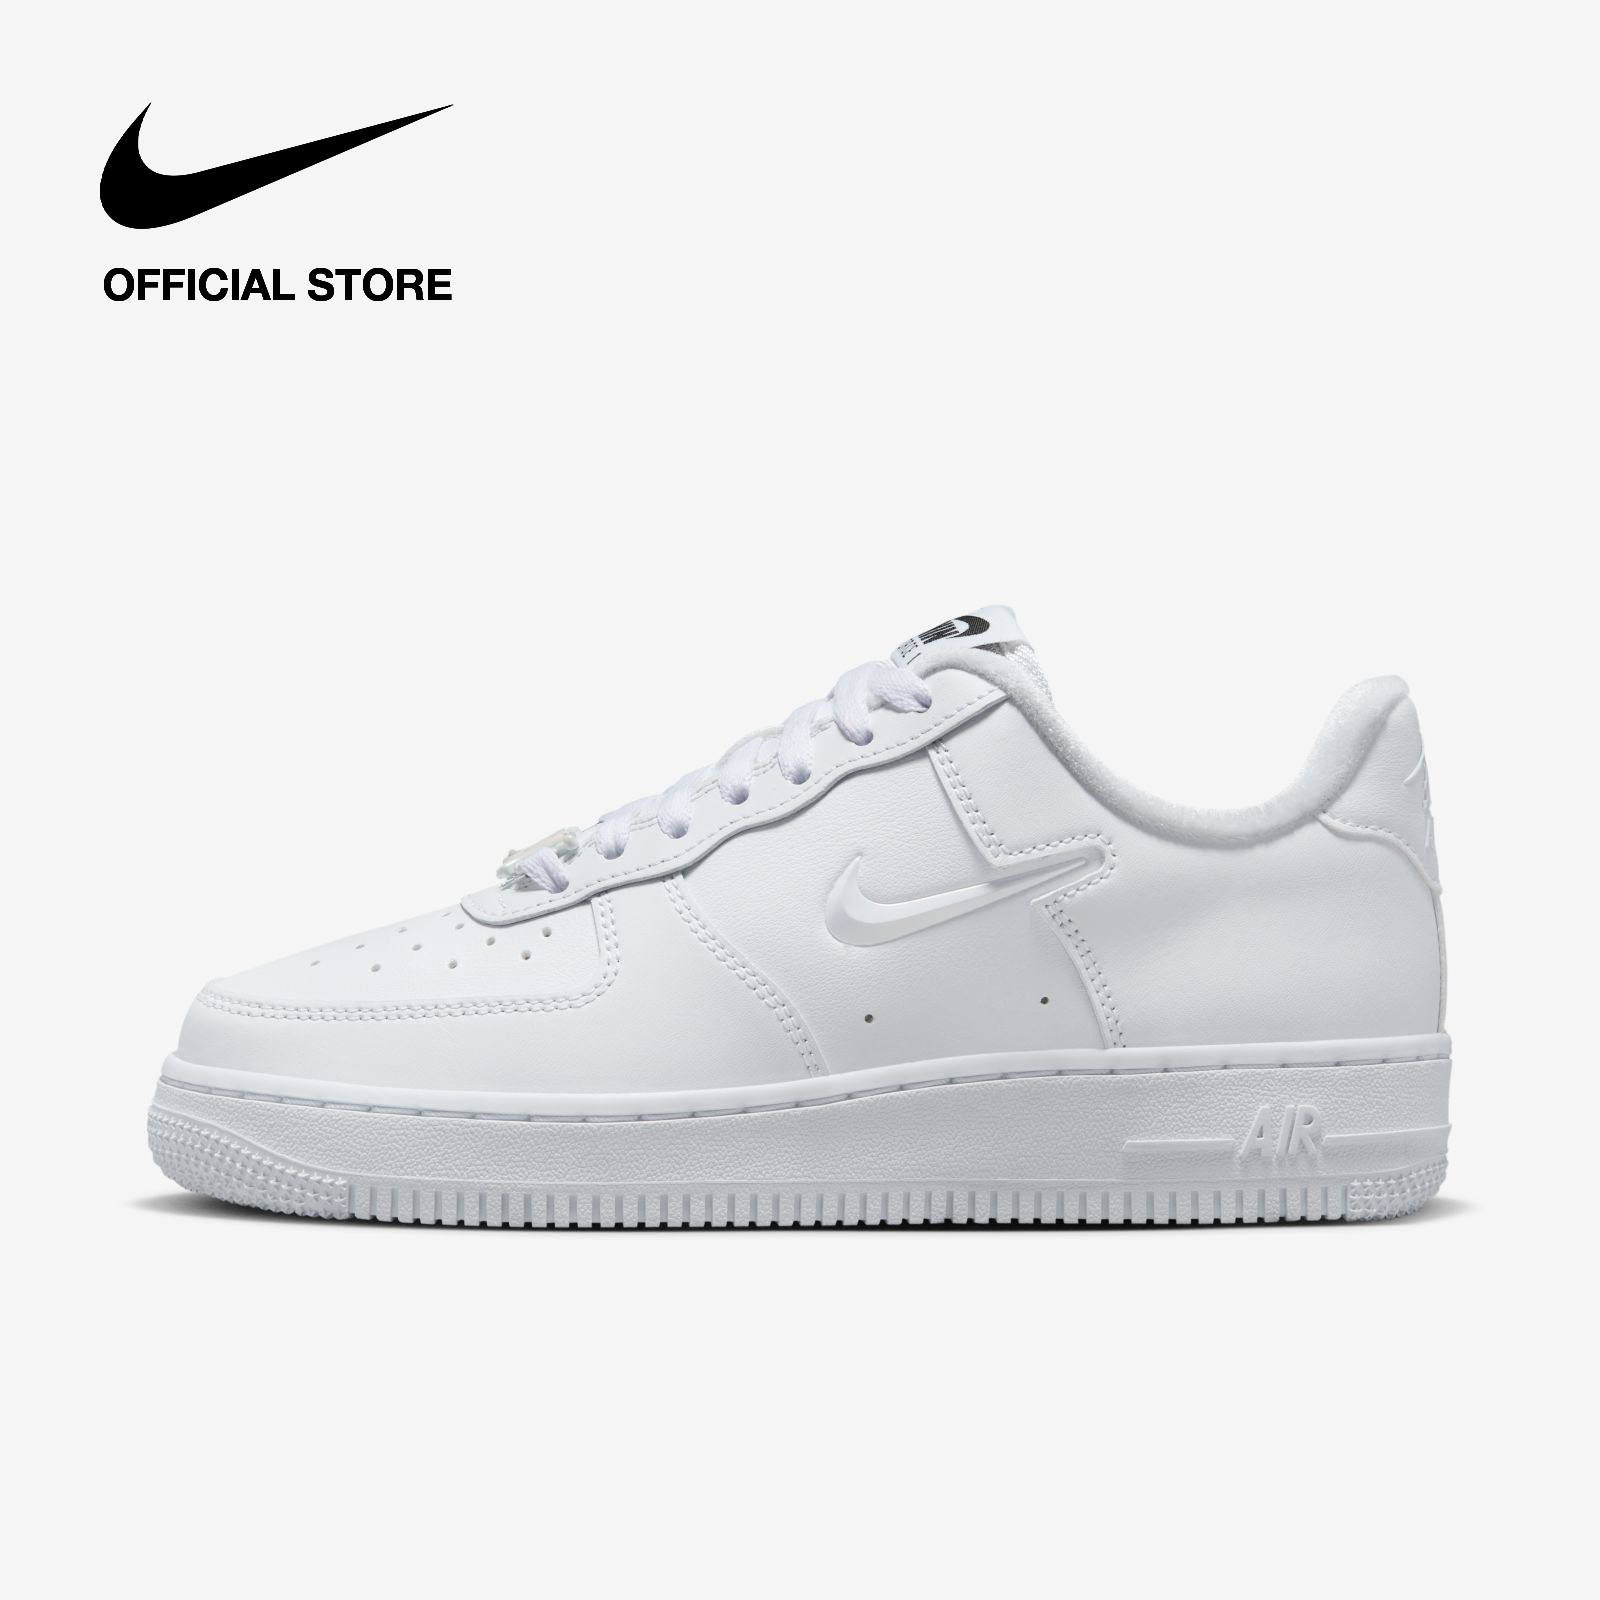 Nike Women's Air Force 1 '07 SE Shoes - White